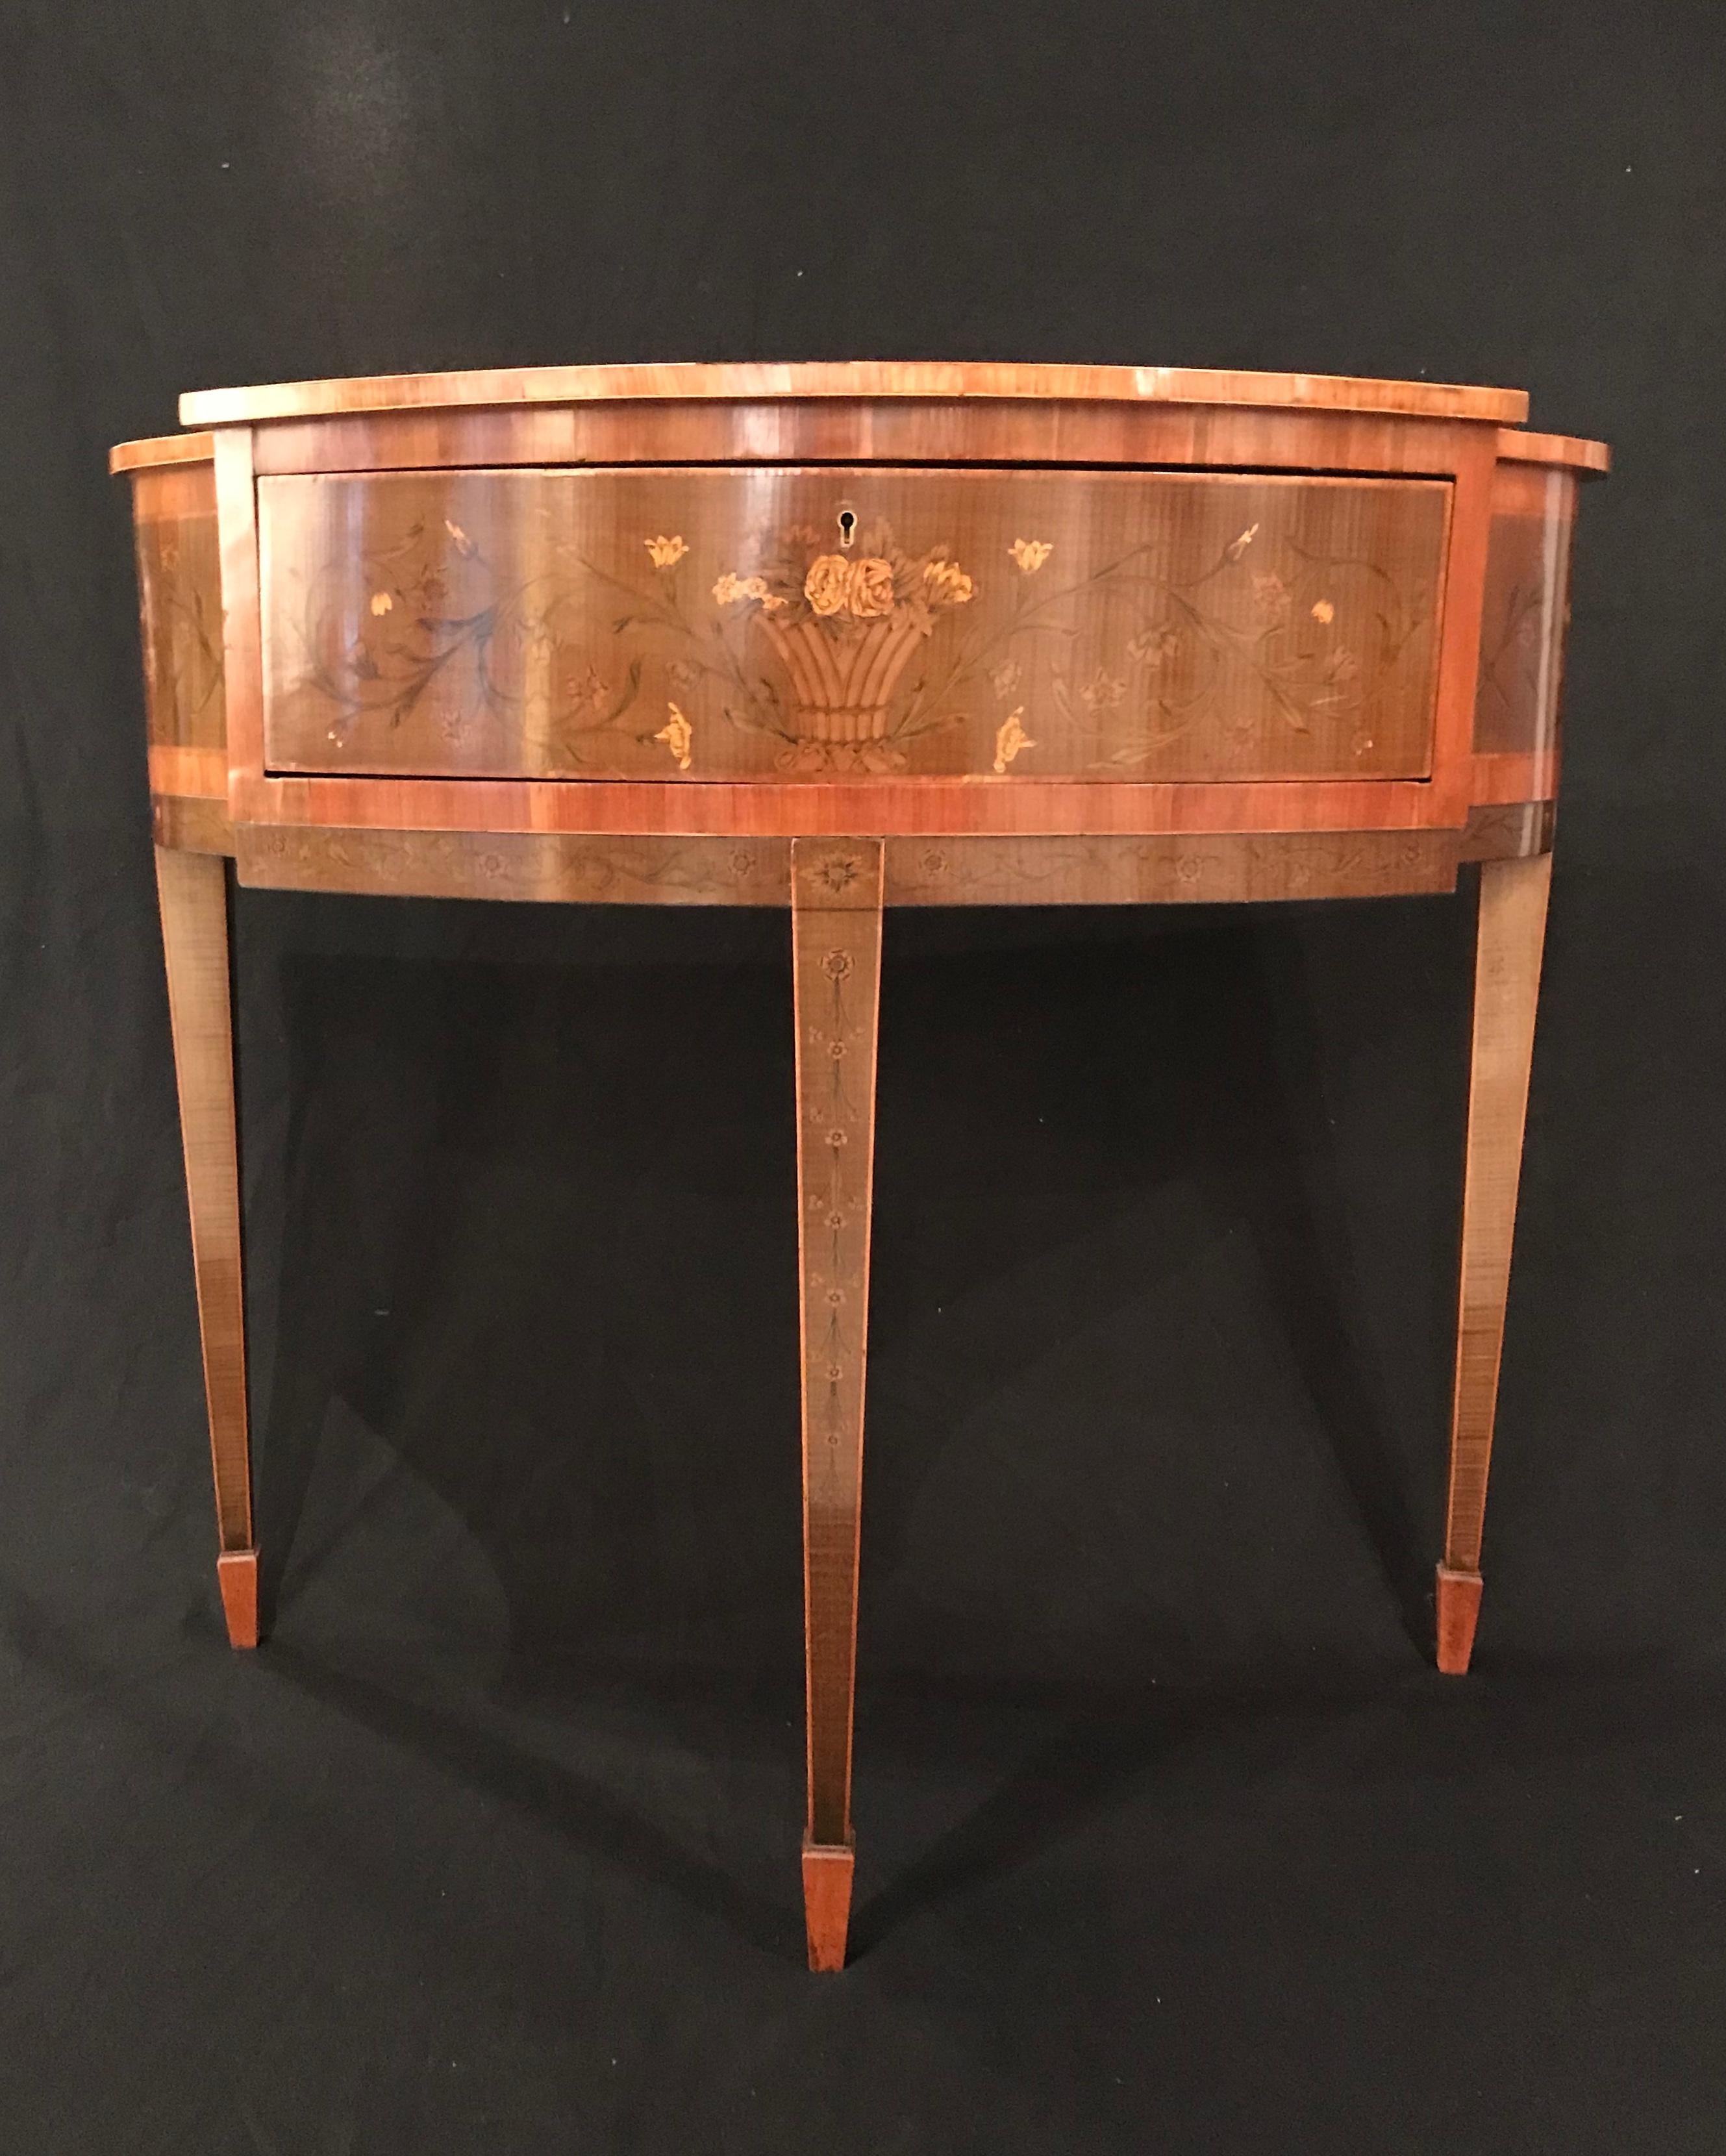 Late 18th Century Edwards & Roberts Tulipwood Ornate Floral Design Side Table For Sale 2